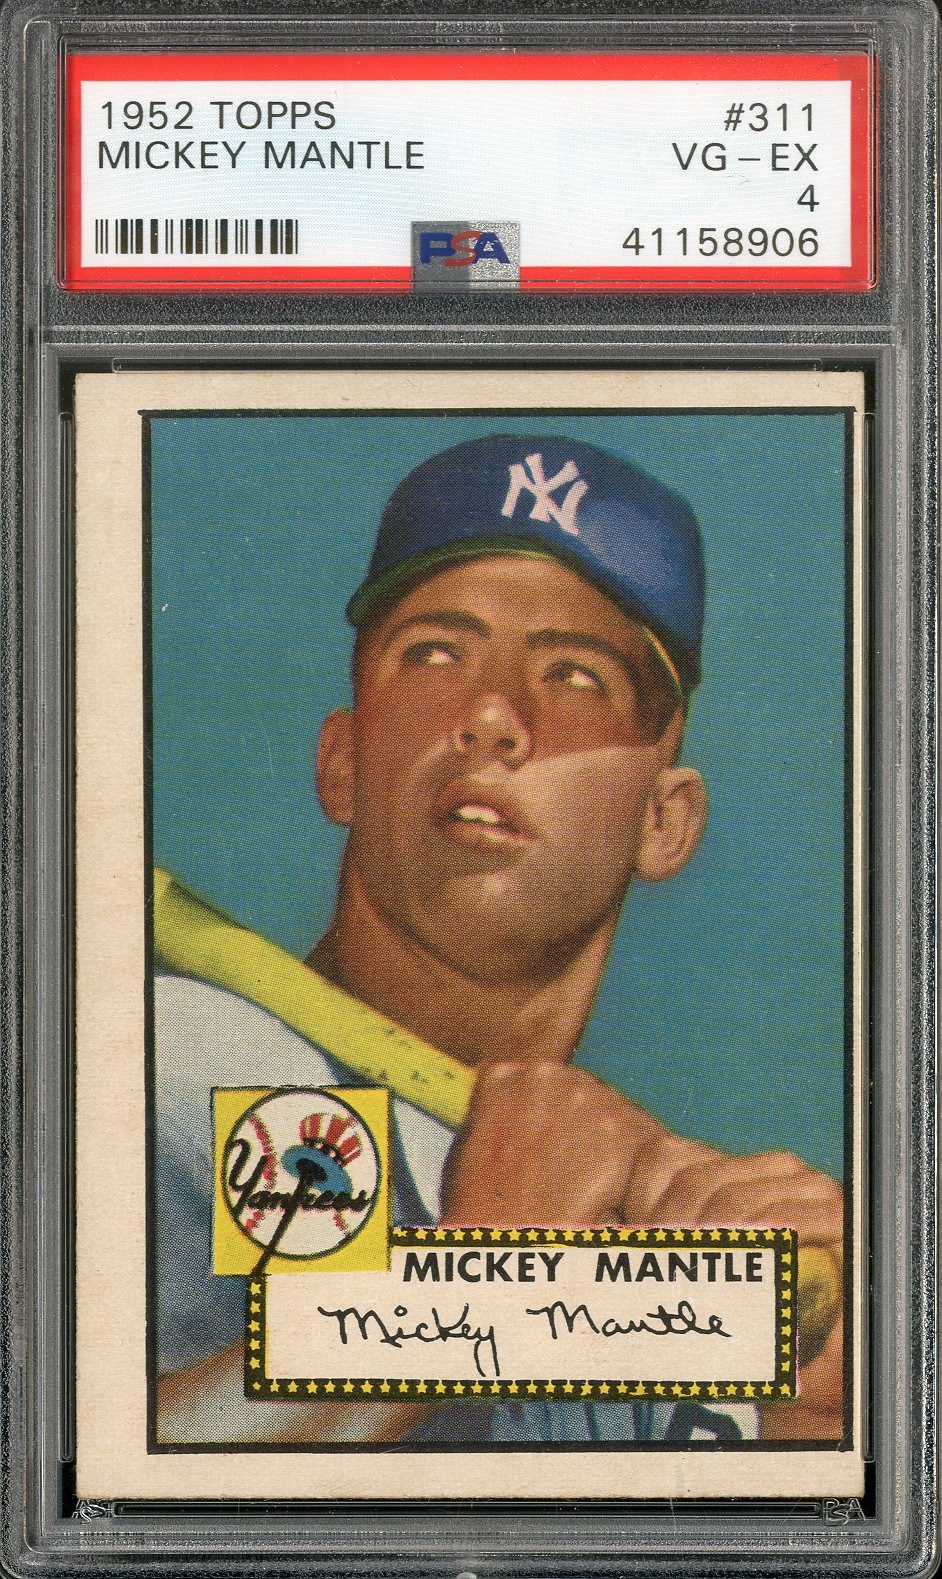 Baseball and Trading Cards - 1952 Topps Mickey Mantle #311 Rookie (PSA VG-EX 4)